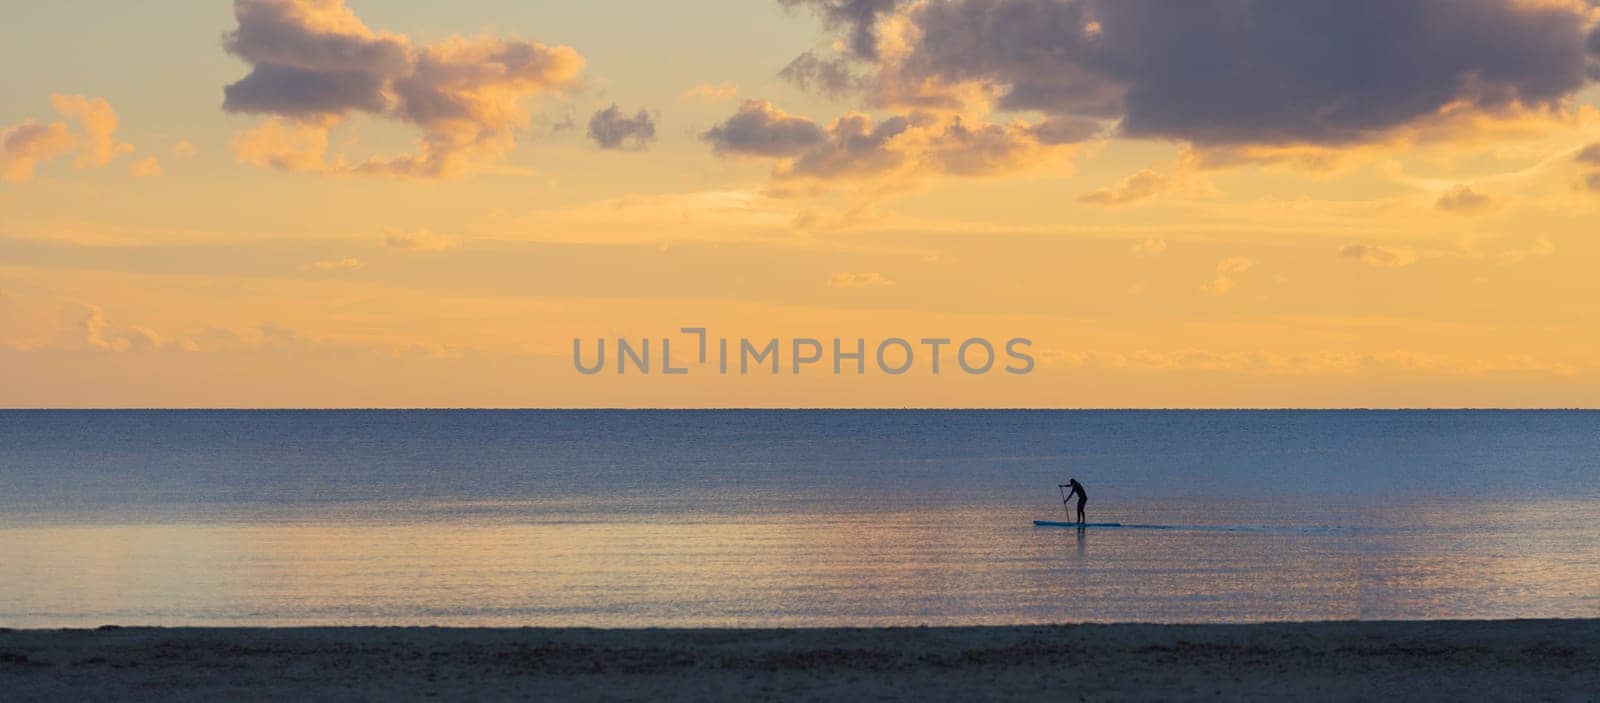 As the day winds down, a paddleboarder glides across the calm ocean, their silhouette a delicate contrast to the pastel hues of the sunset sky. This peaceful scene, set at the intersection of sea and sky, encapsulates the essence of tranquil seaside evenings.